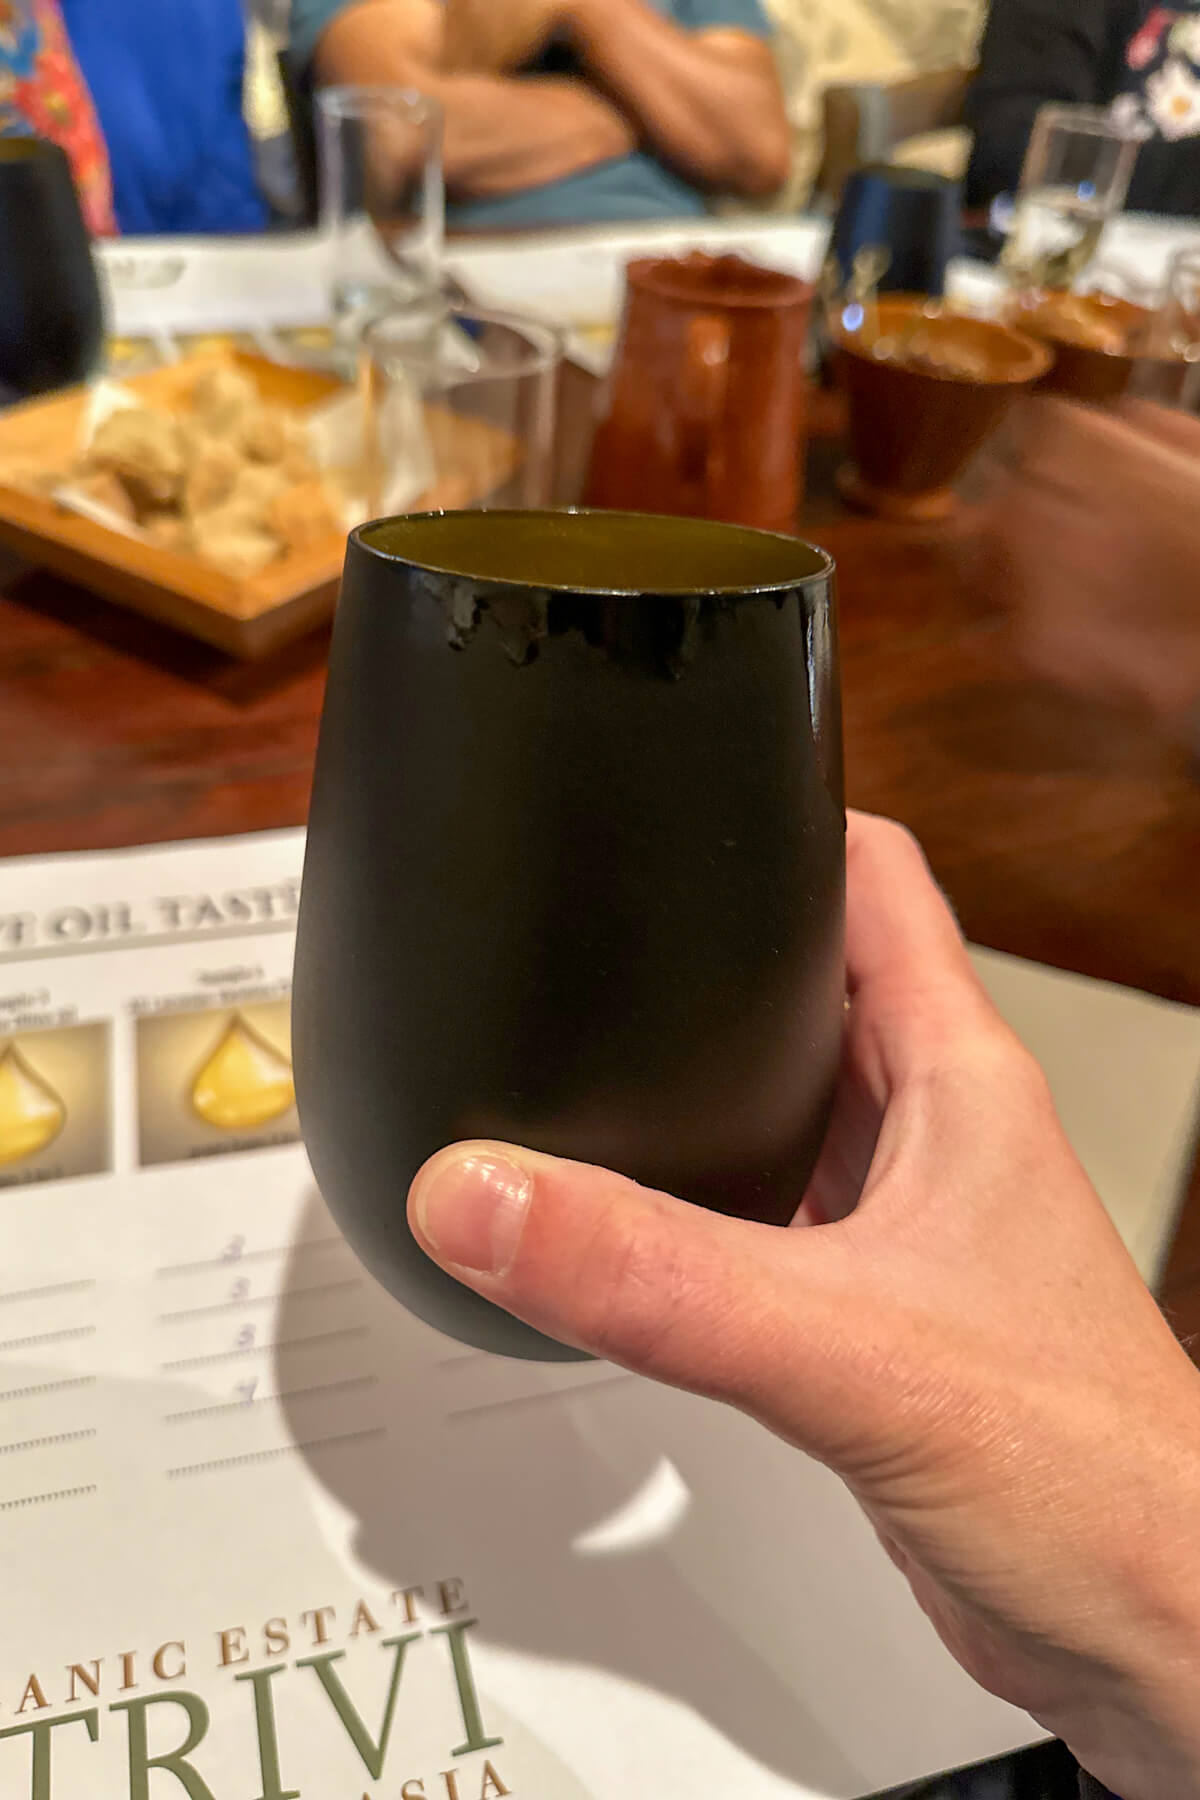 A cup held out with a hand used for the olive oil tasting